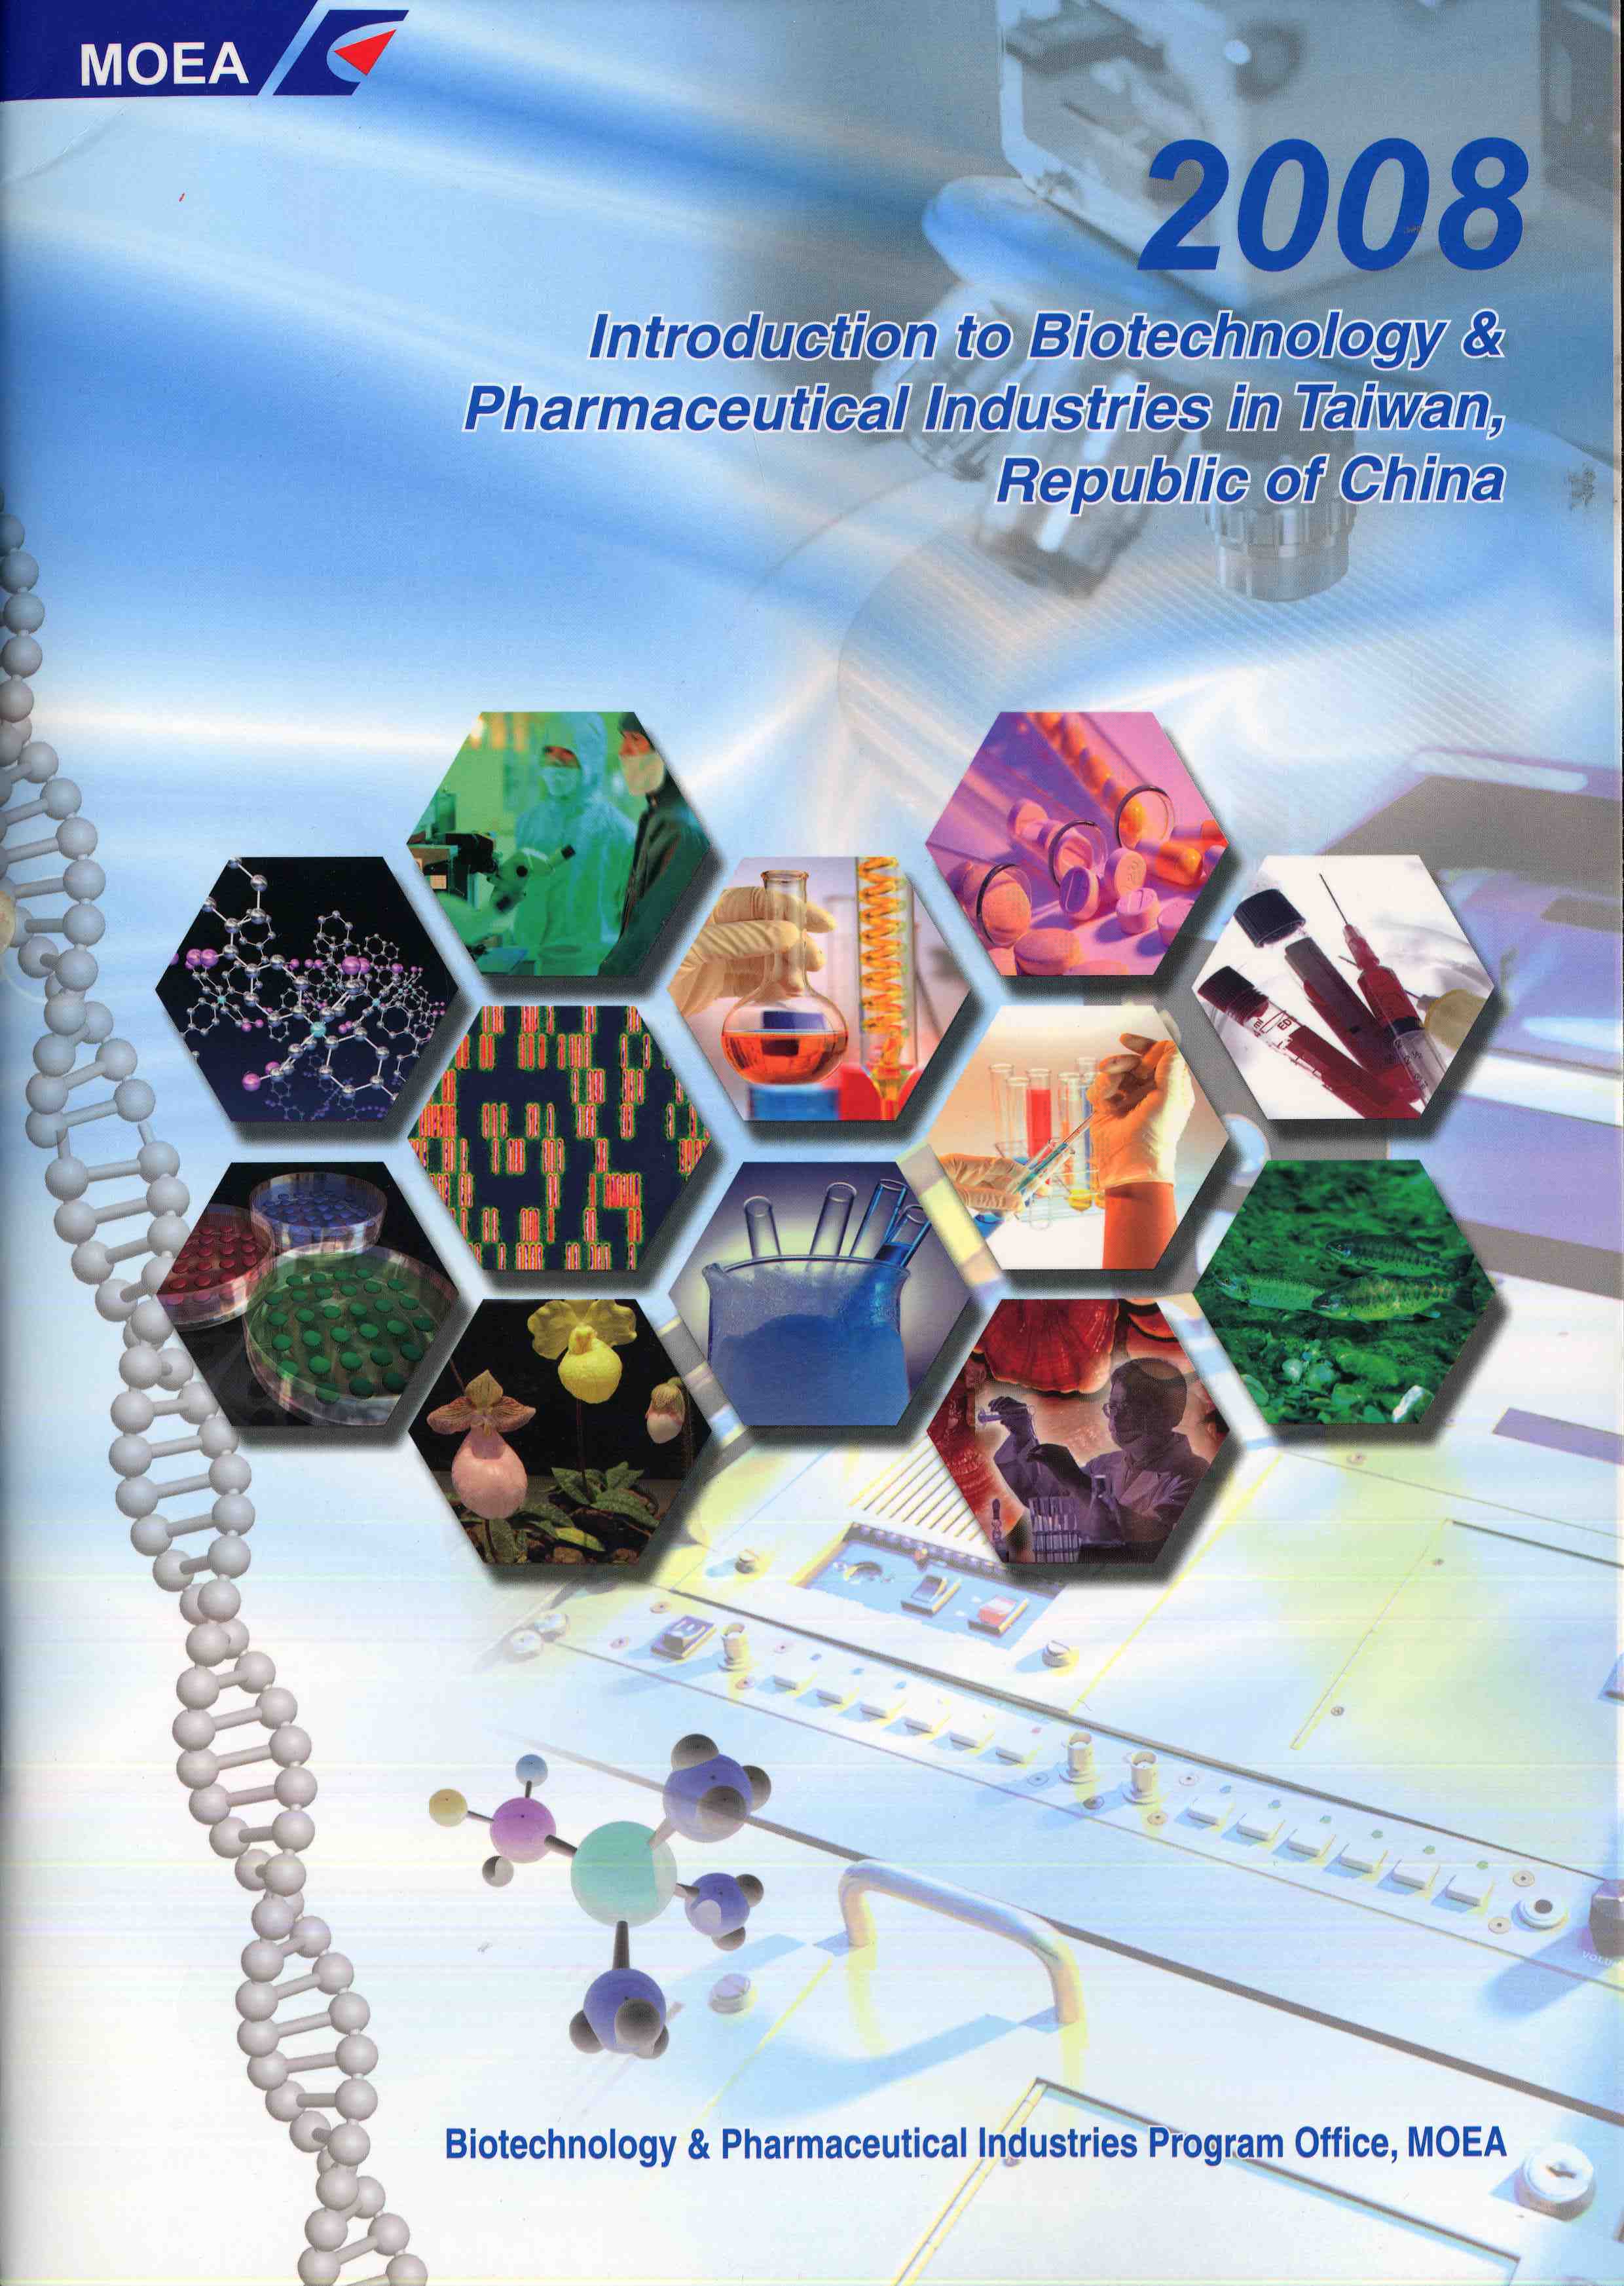 2008 Introduction to Biotechnology & Pharmaceutical Industries in Taiwan, Republic of China